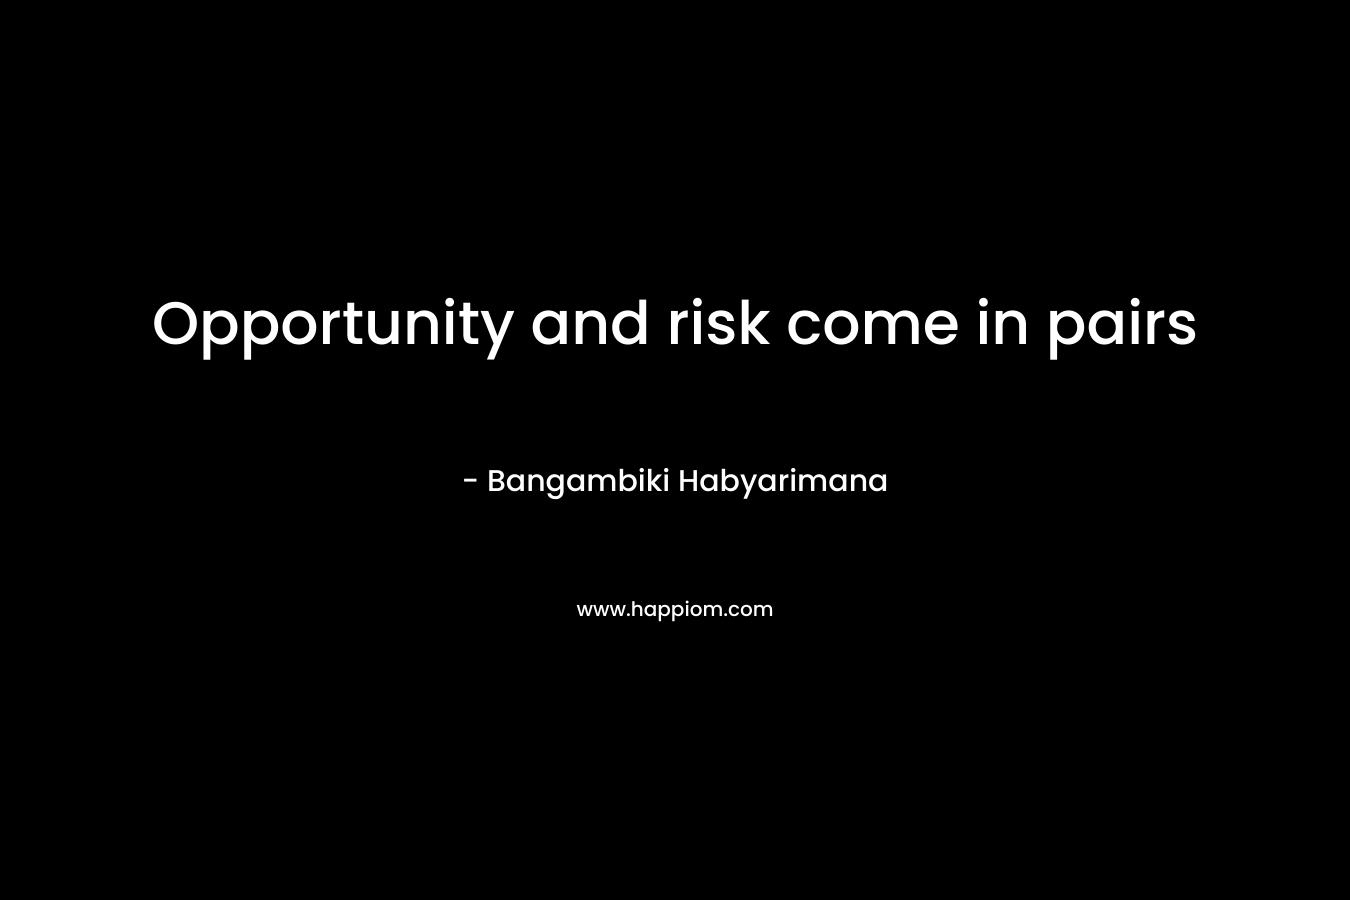 Opportunity and risk come in pairs